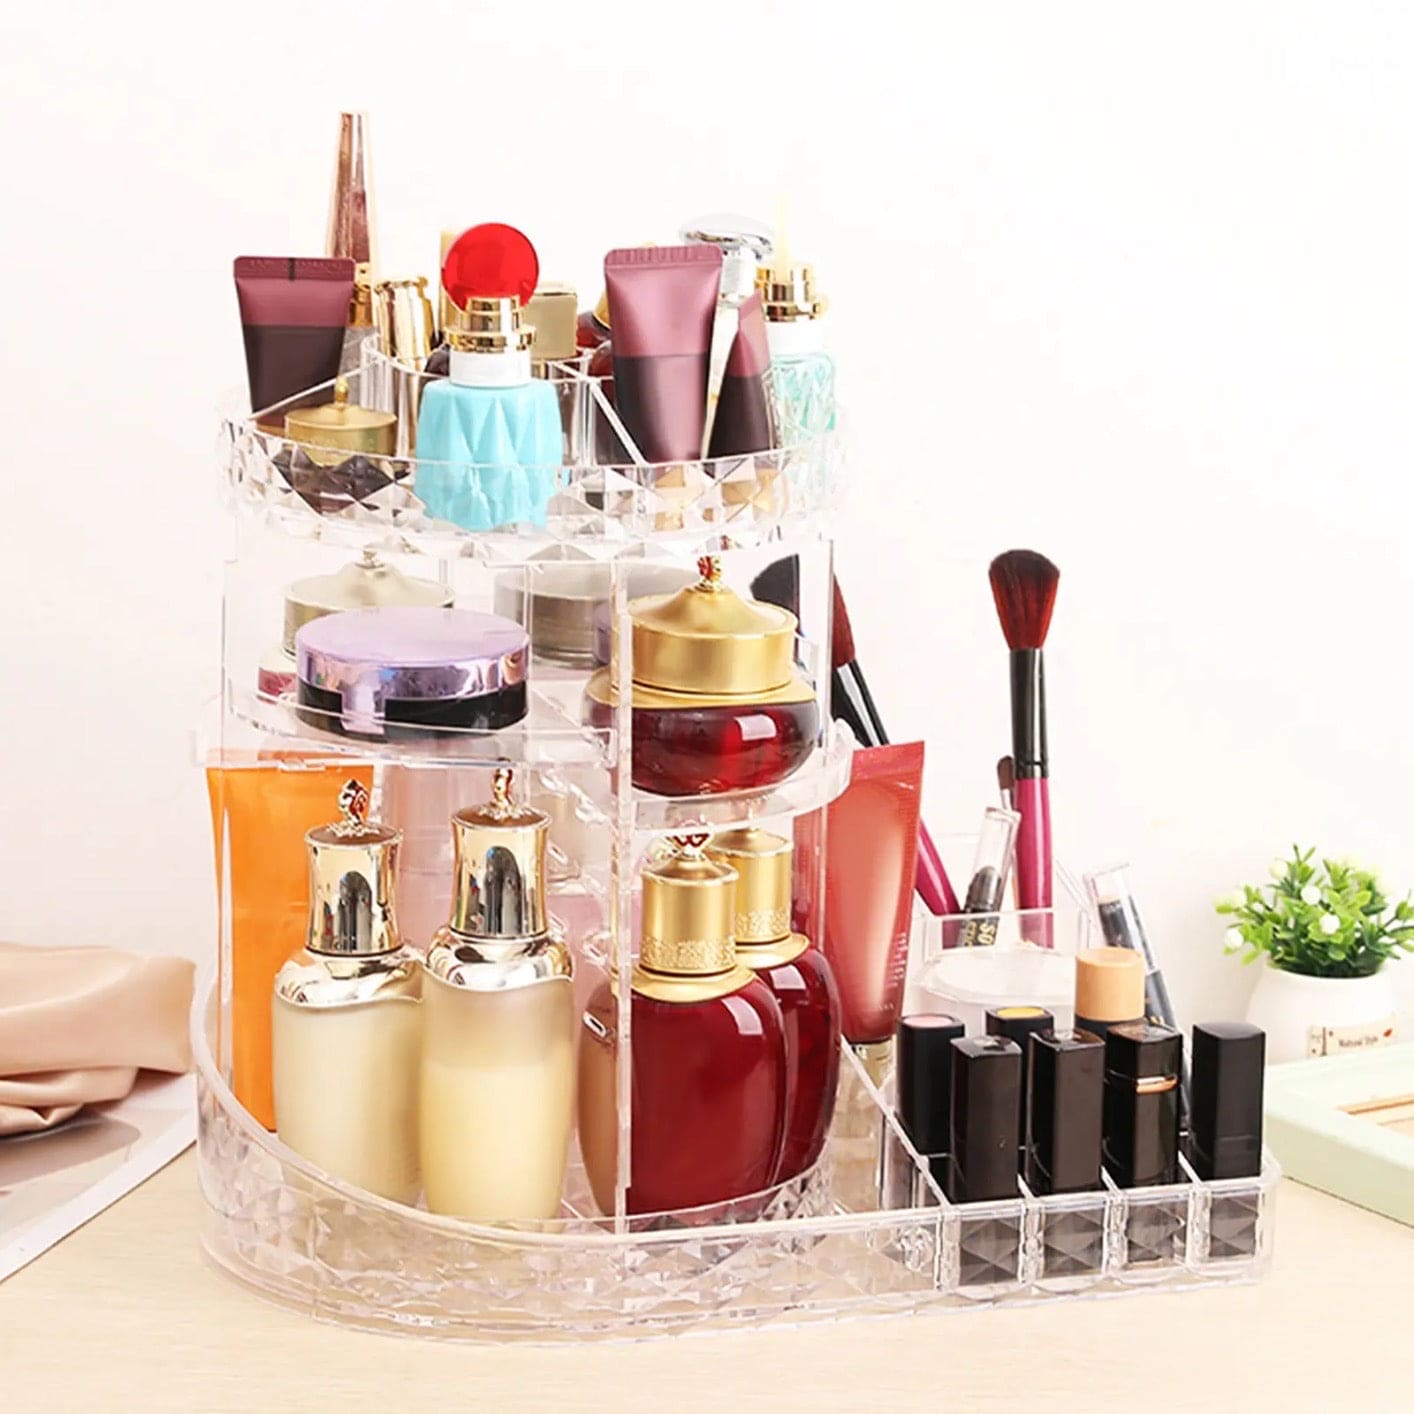 All In One Makeup Organizer, 360 Degree Rotation Makeup Organizer, Crystal Makeup Display Stand, Multifunction Detachable Makeup Beauty Organizer, Adjustable Cosmetic Display Case, Rotatable Transparent Beauty Organizer